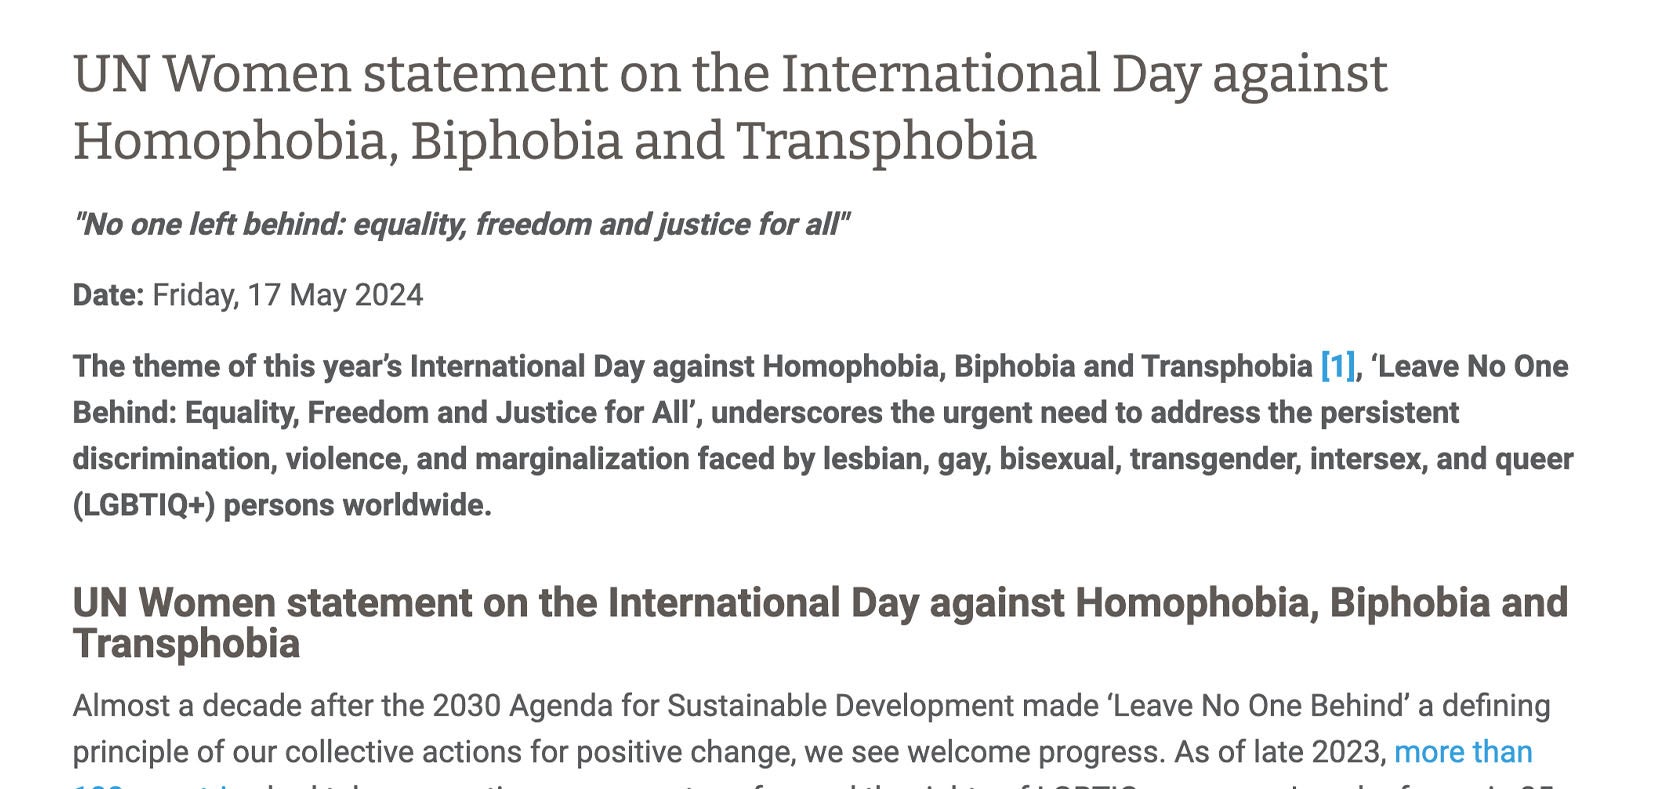 UN Women statement on the International Day against Homophobia, Biphobia and Transphobia, 2024